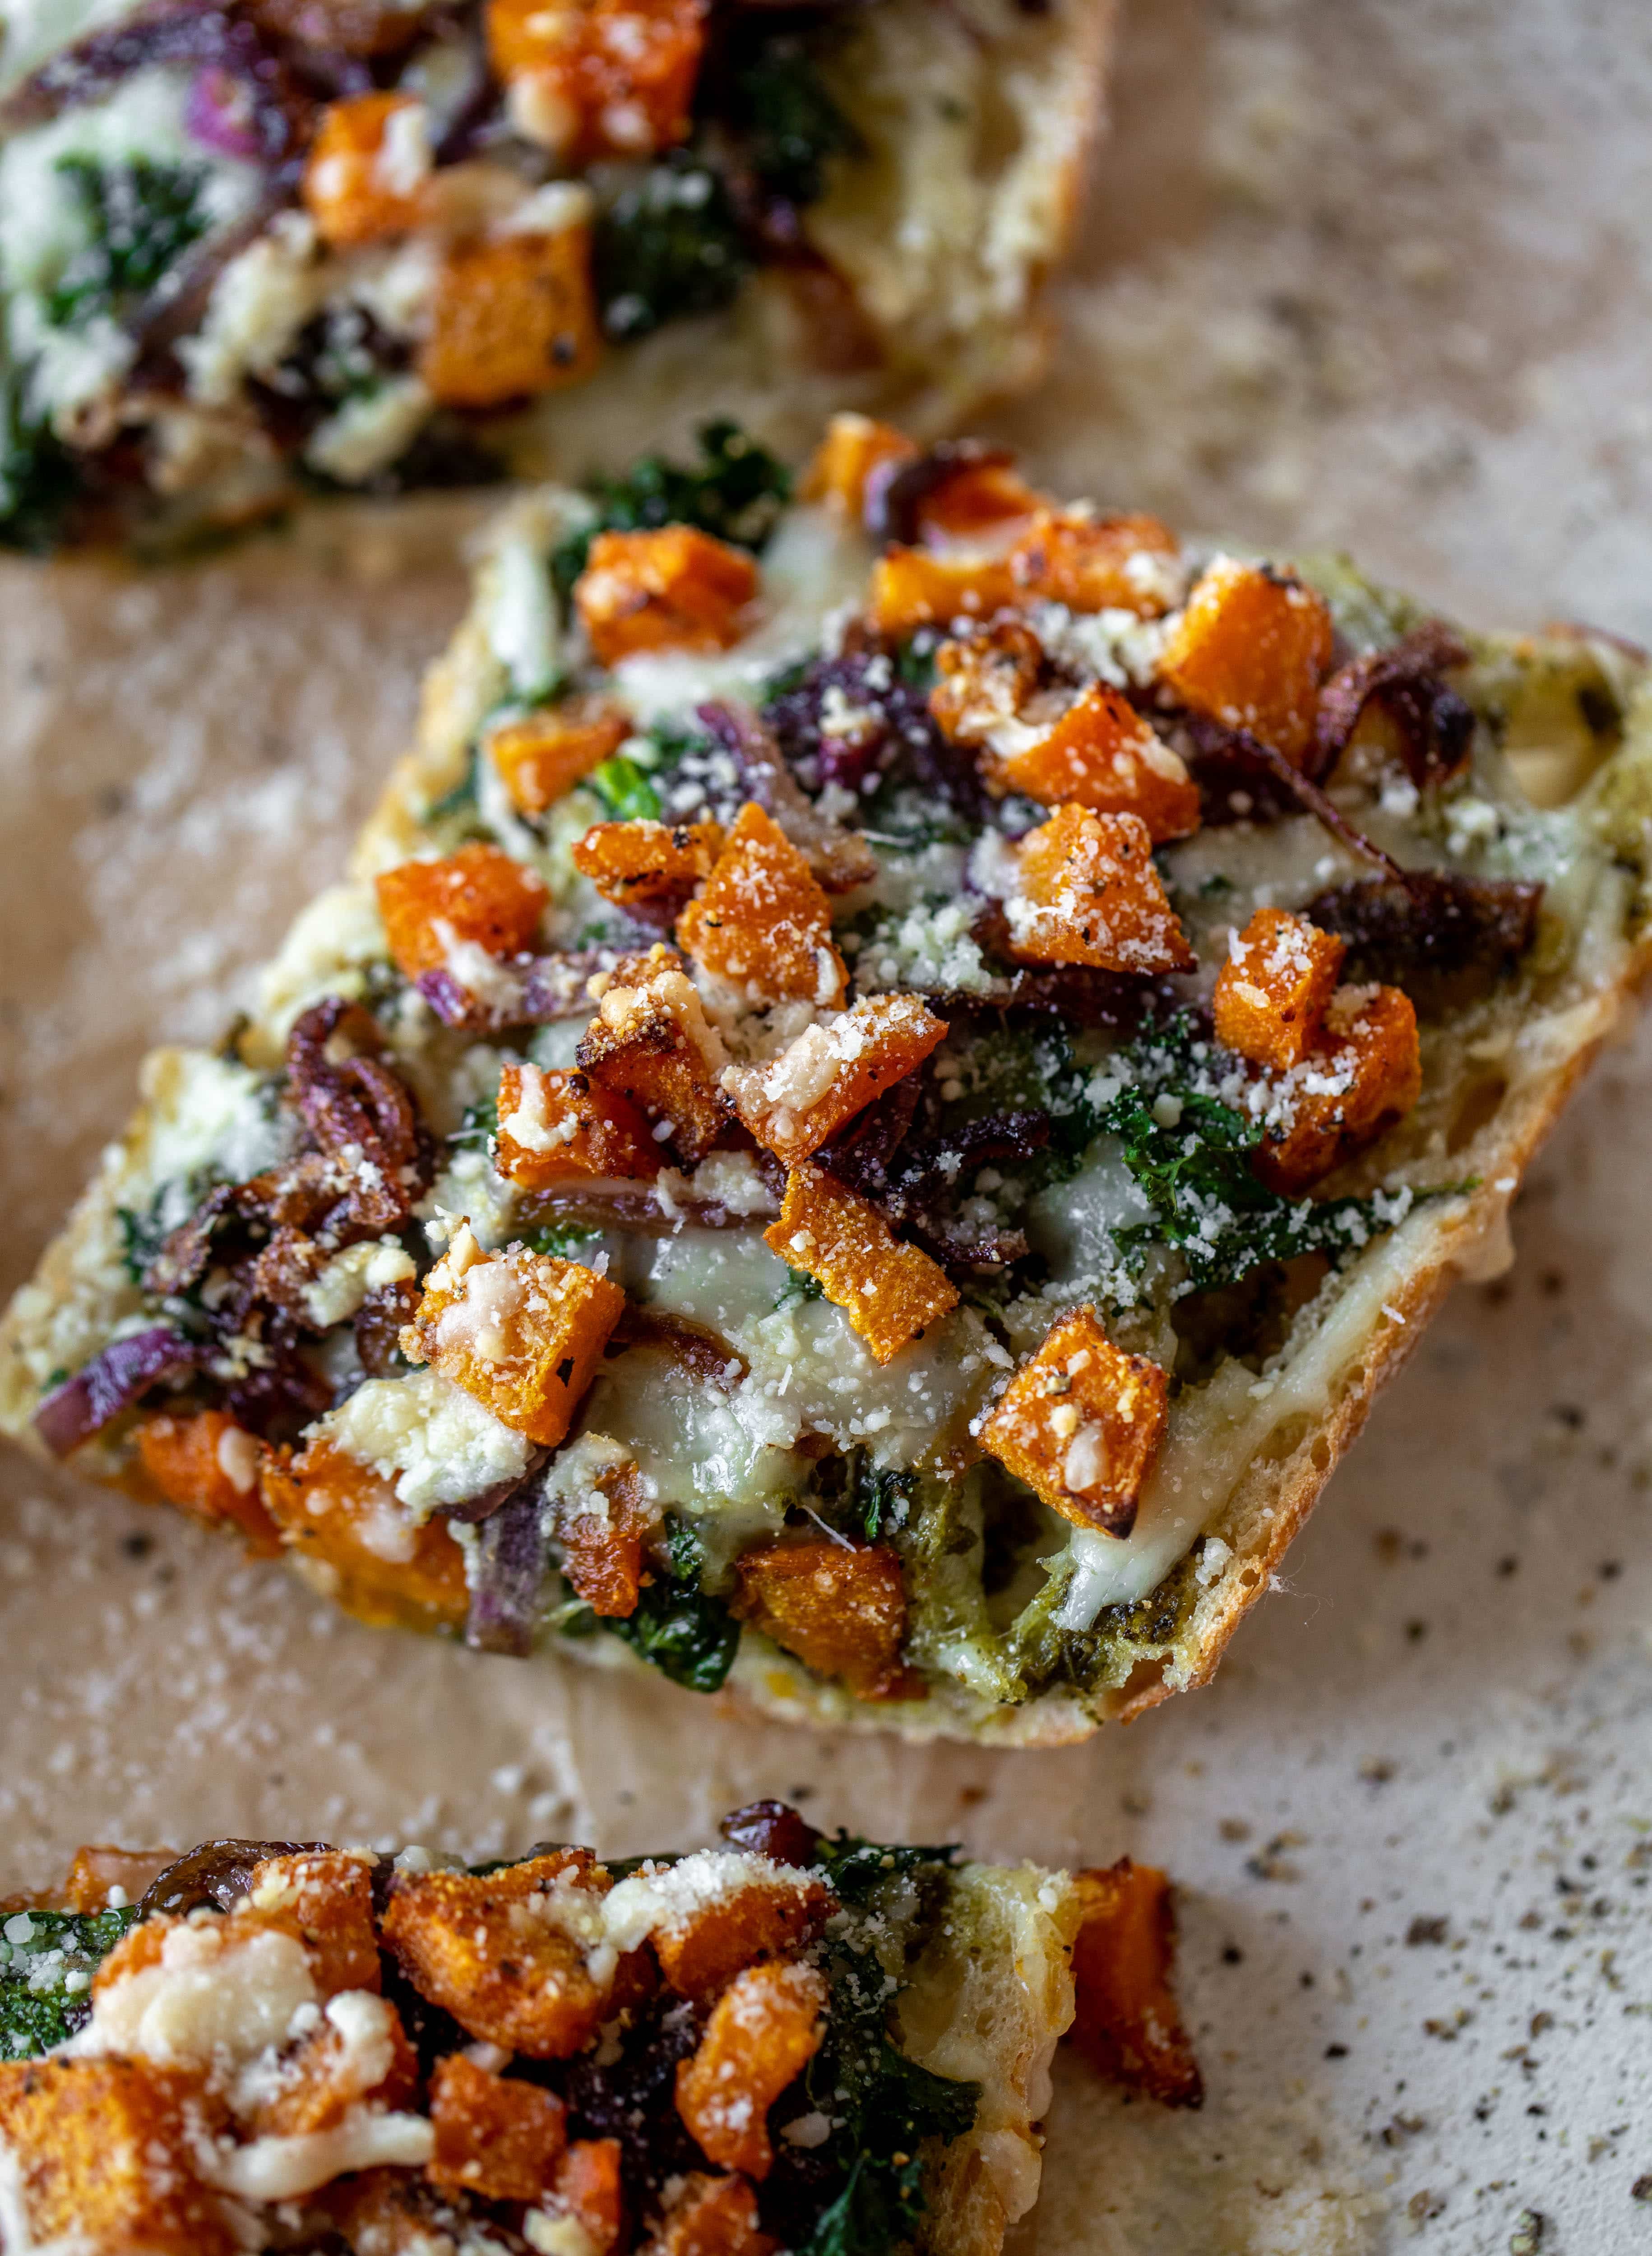 These butternut squash french breads have so much flavor. Pesto, caramelized onions, kale, roasted butternut and tons of fontina cheese. Delicious! 